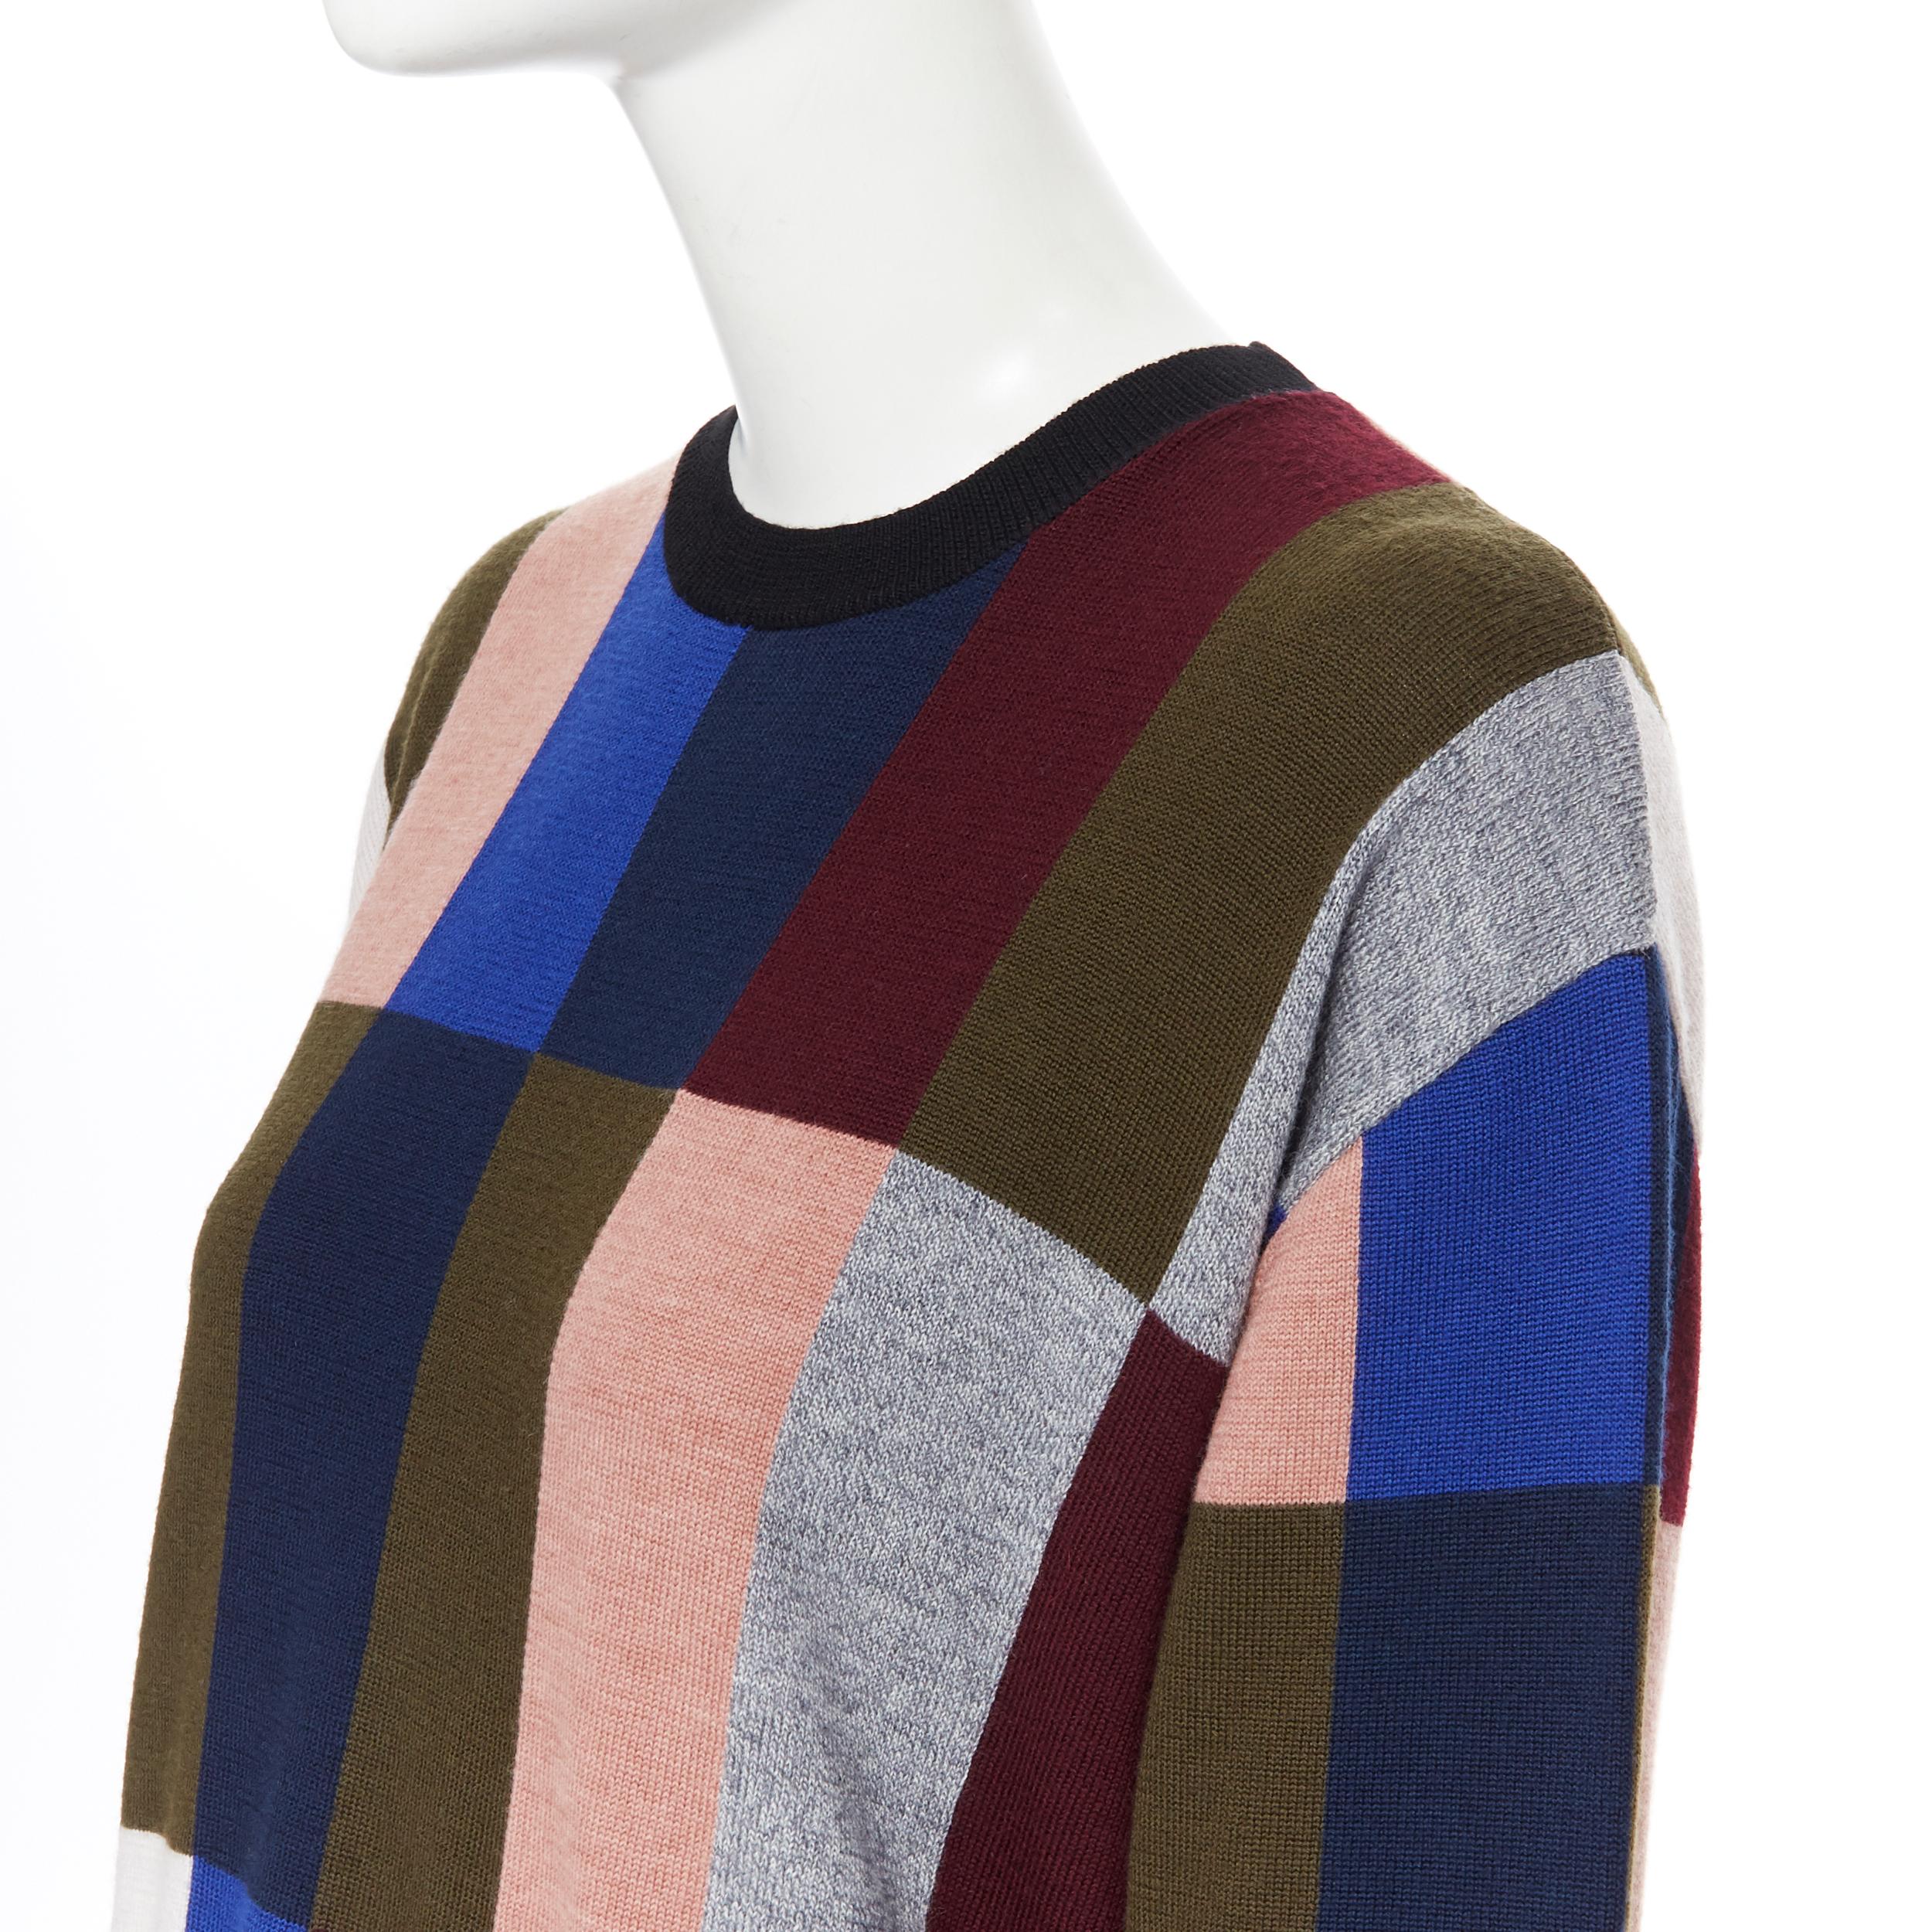 Women's new VVB VICTORIA BECKHAM 100% wool graphic colorblocked oversized sweater UK8